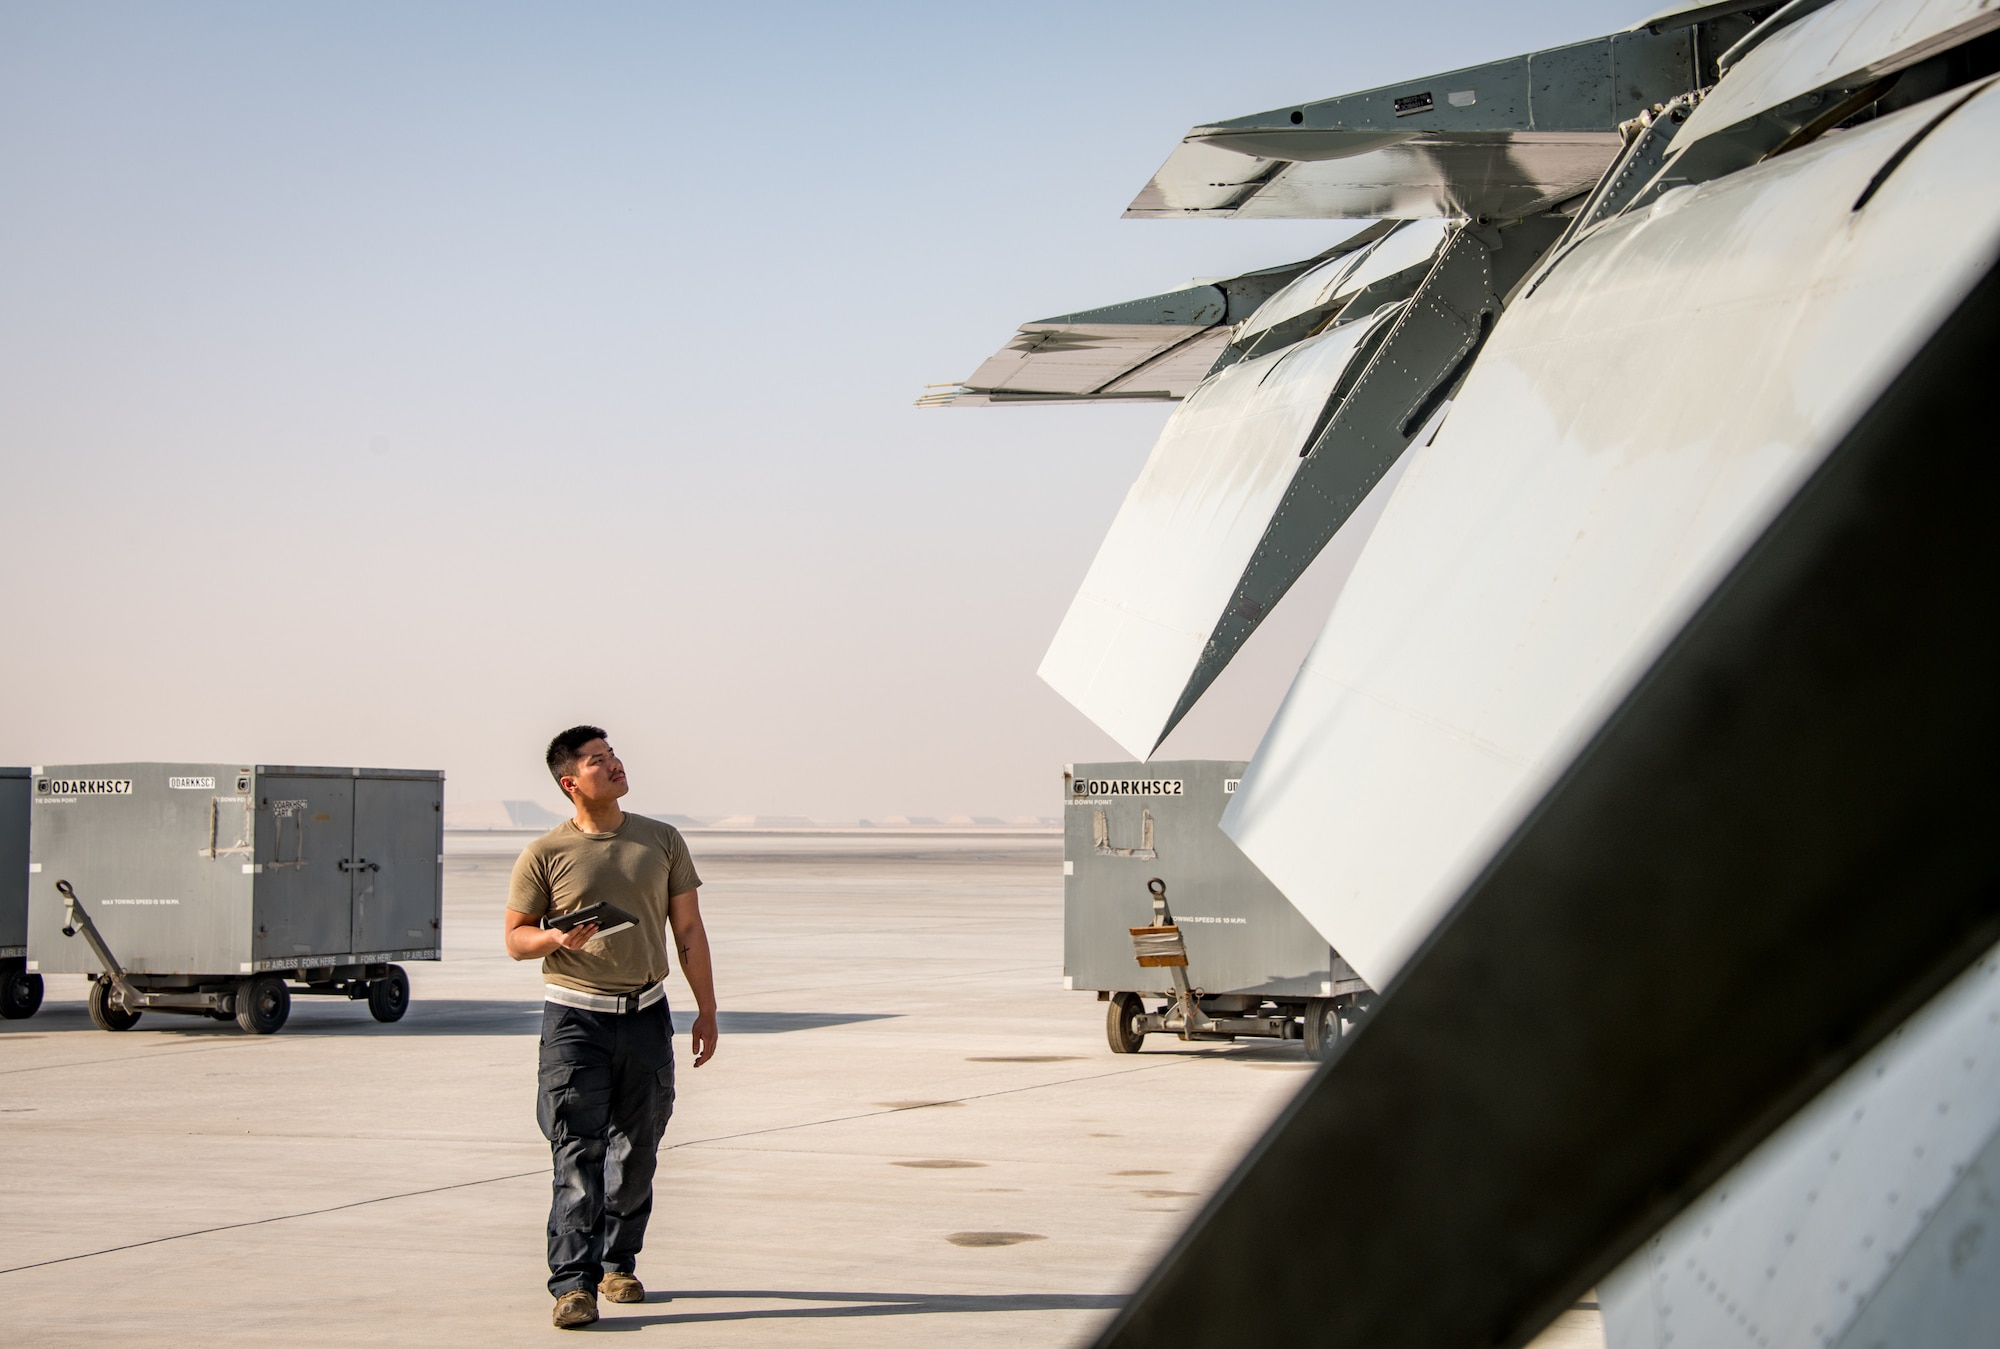 A man inspects the wing of an aircraft on a flightline